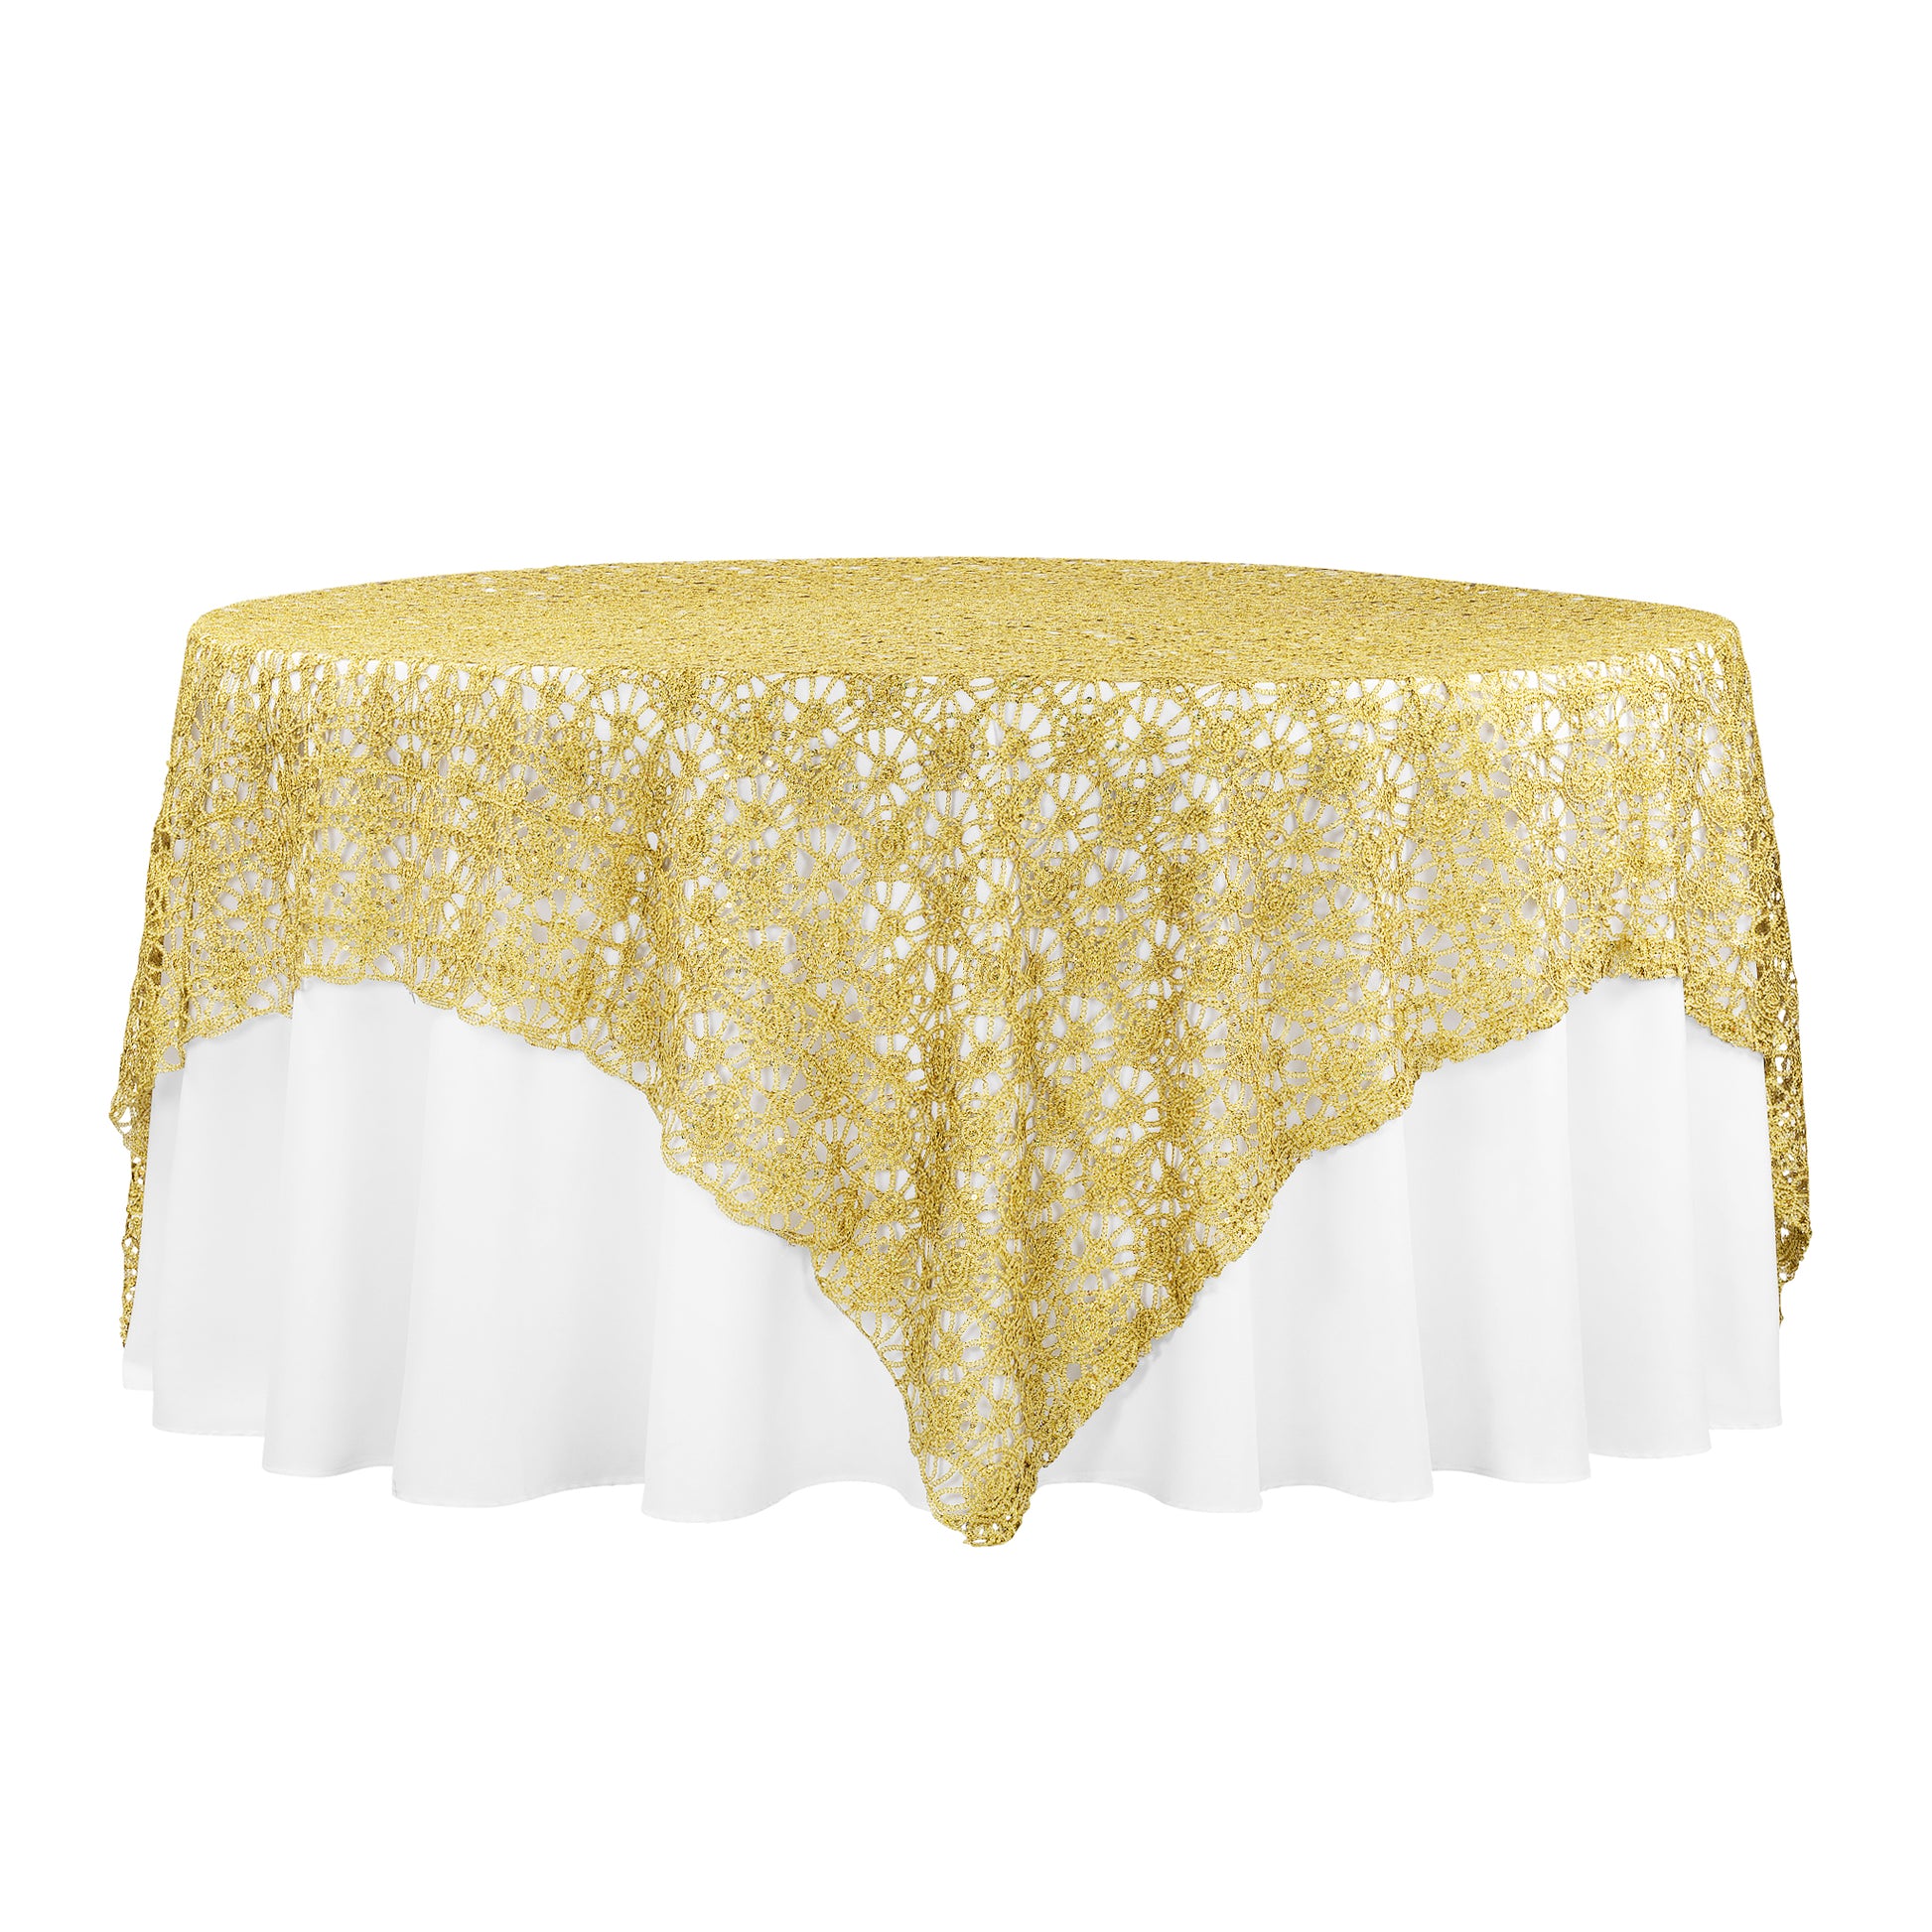 Chemical Lace 90"x90" Square Table Overlay - Gold - CV Linens